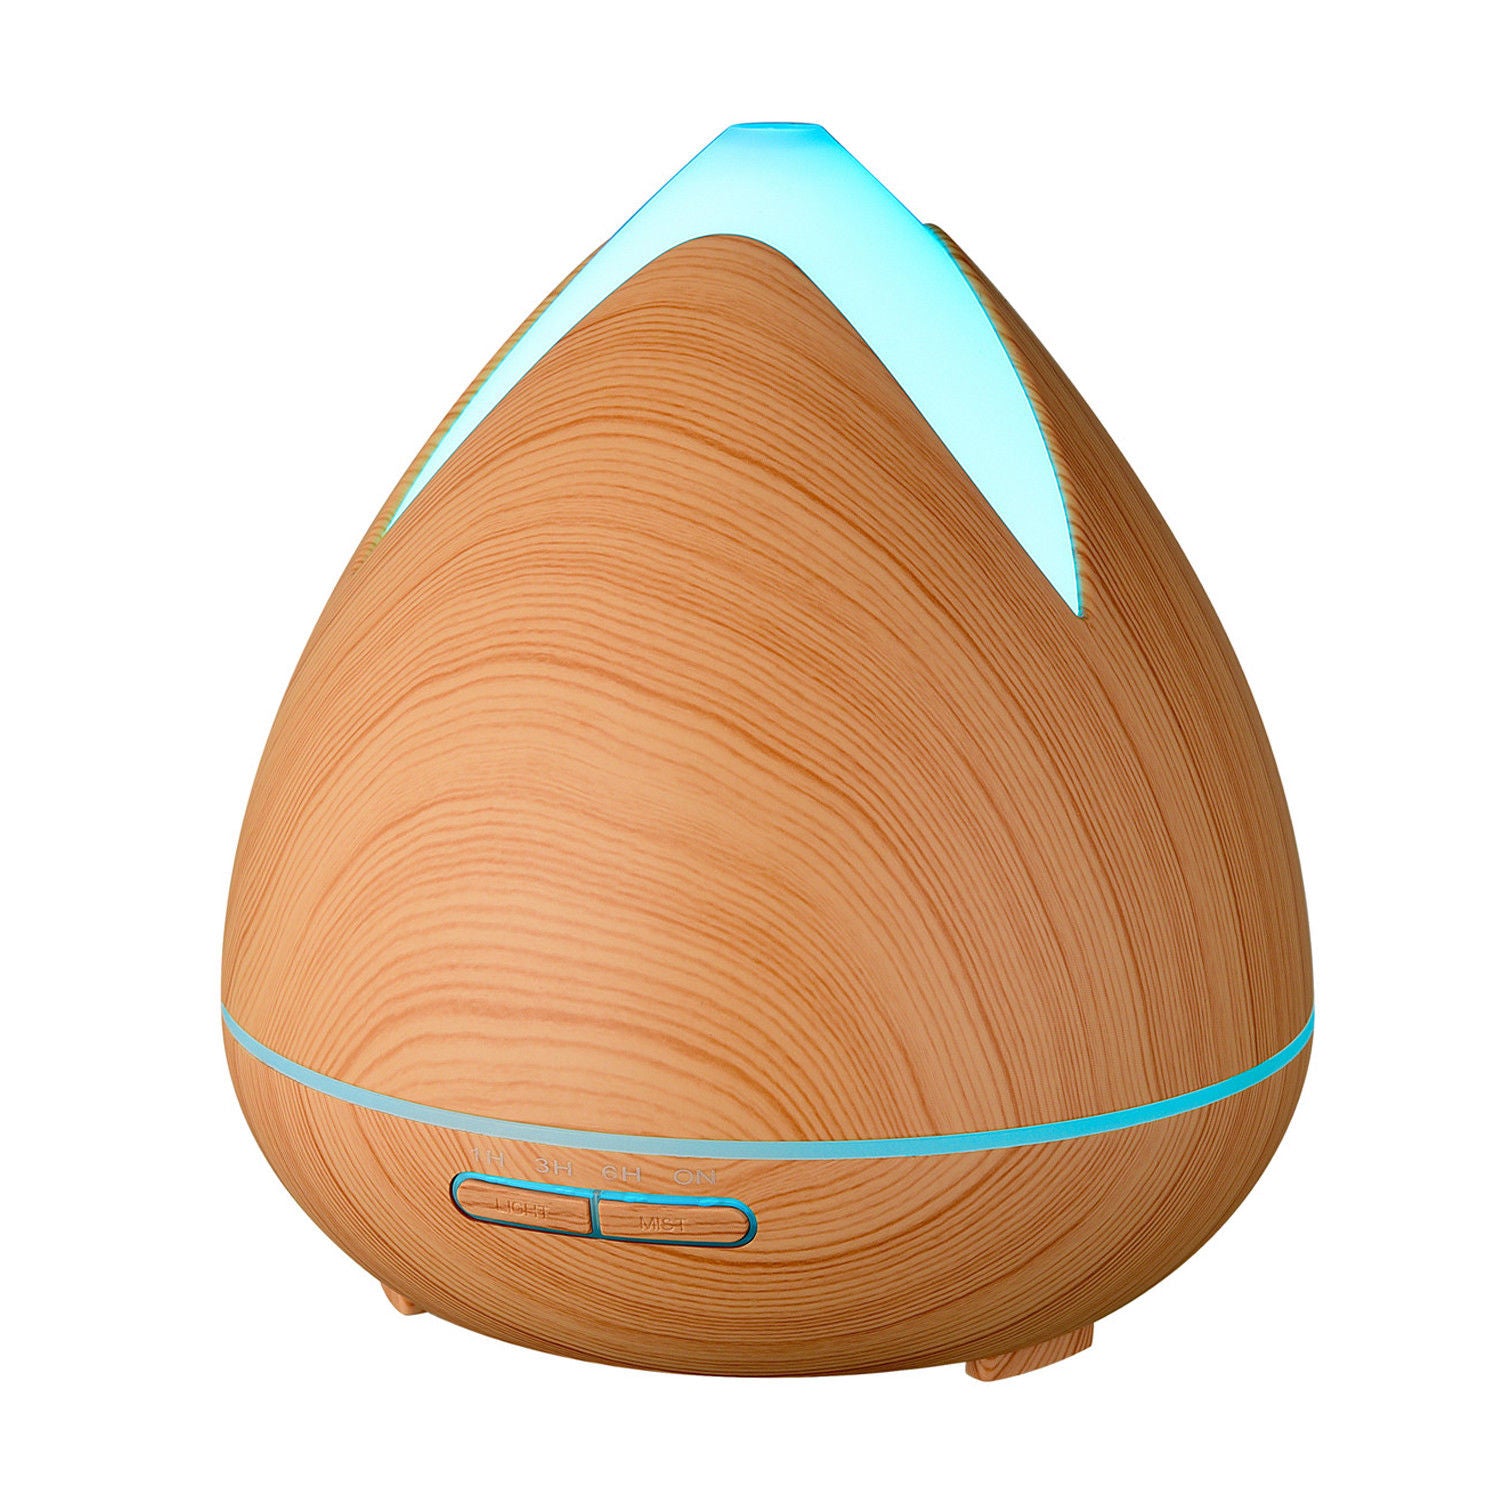 Essential Oils Ultrasonic Aromatherapy Diffuser Air Humidifier Purify 400ML  Light Wood